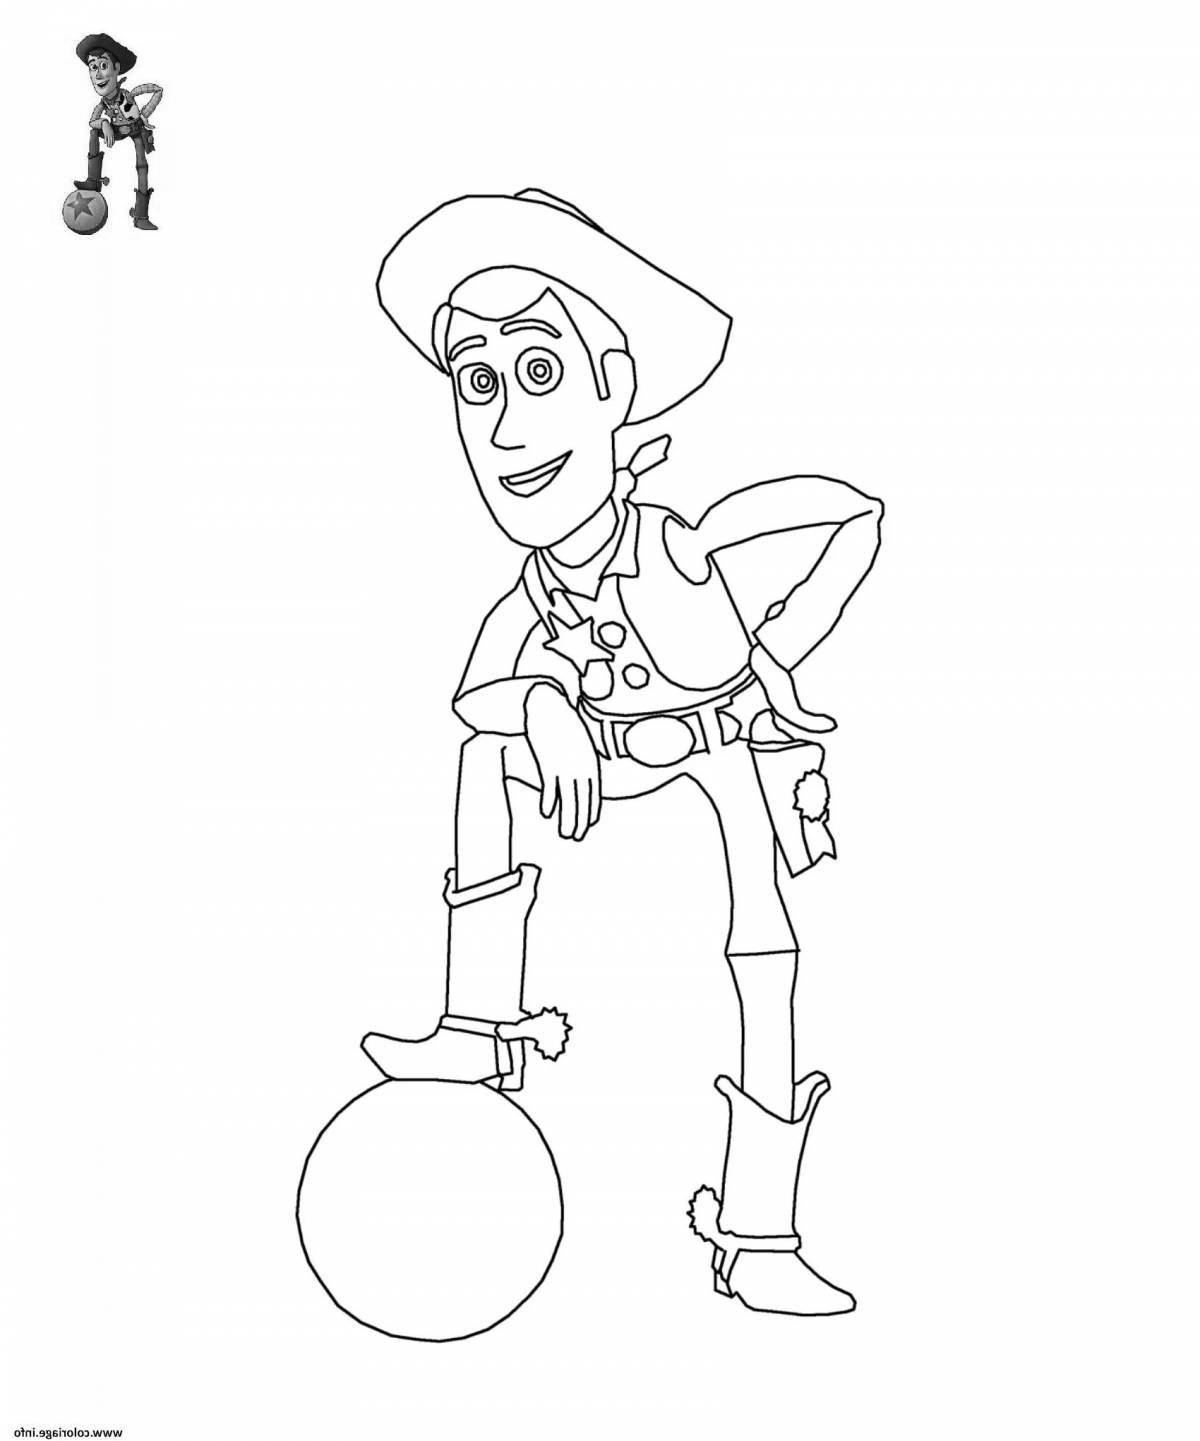 Adorable Woody from Toy Story